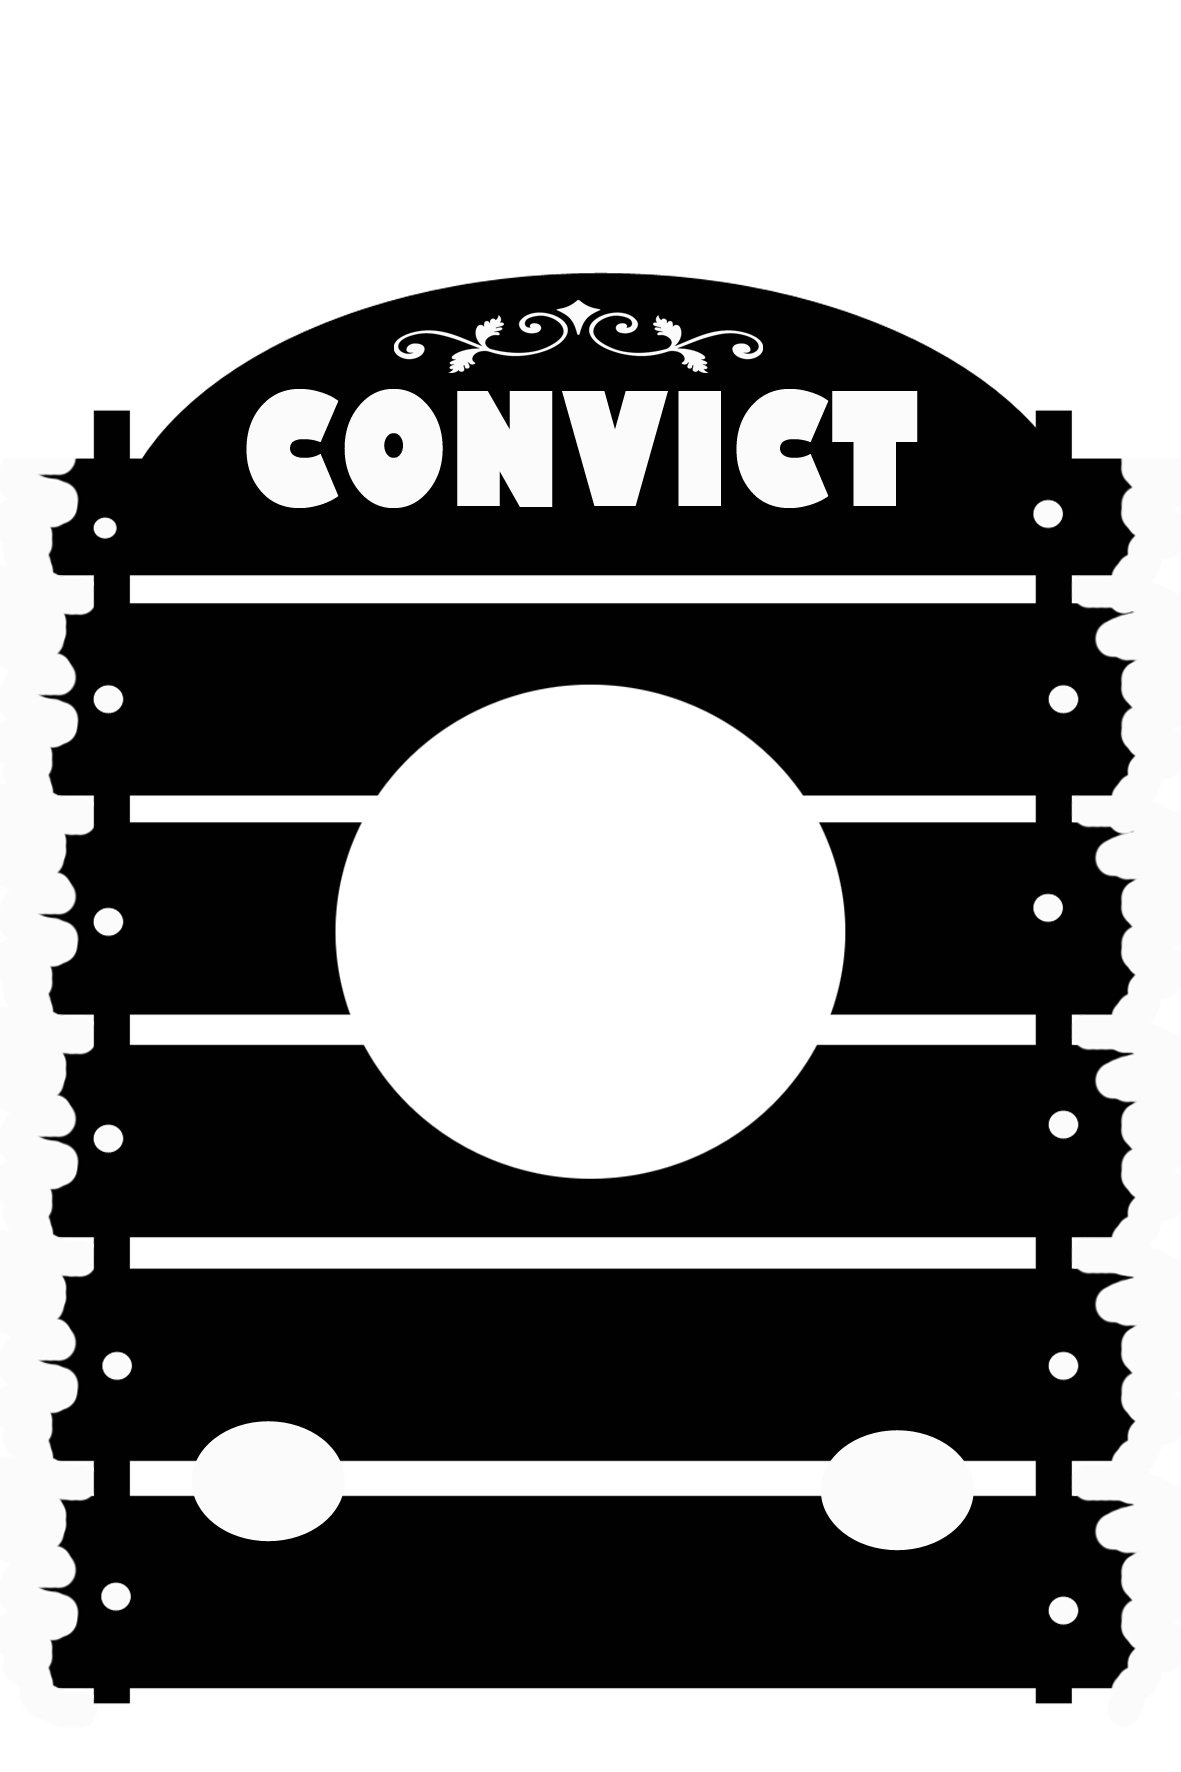 CONVICT STOCKS 100 x 150 mm  (6x4) sold in 3